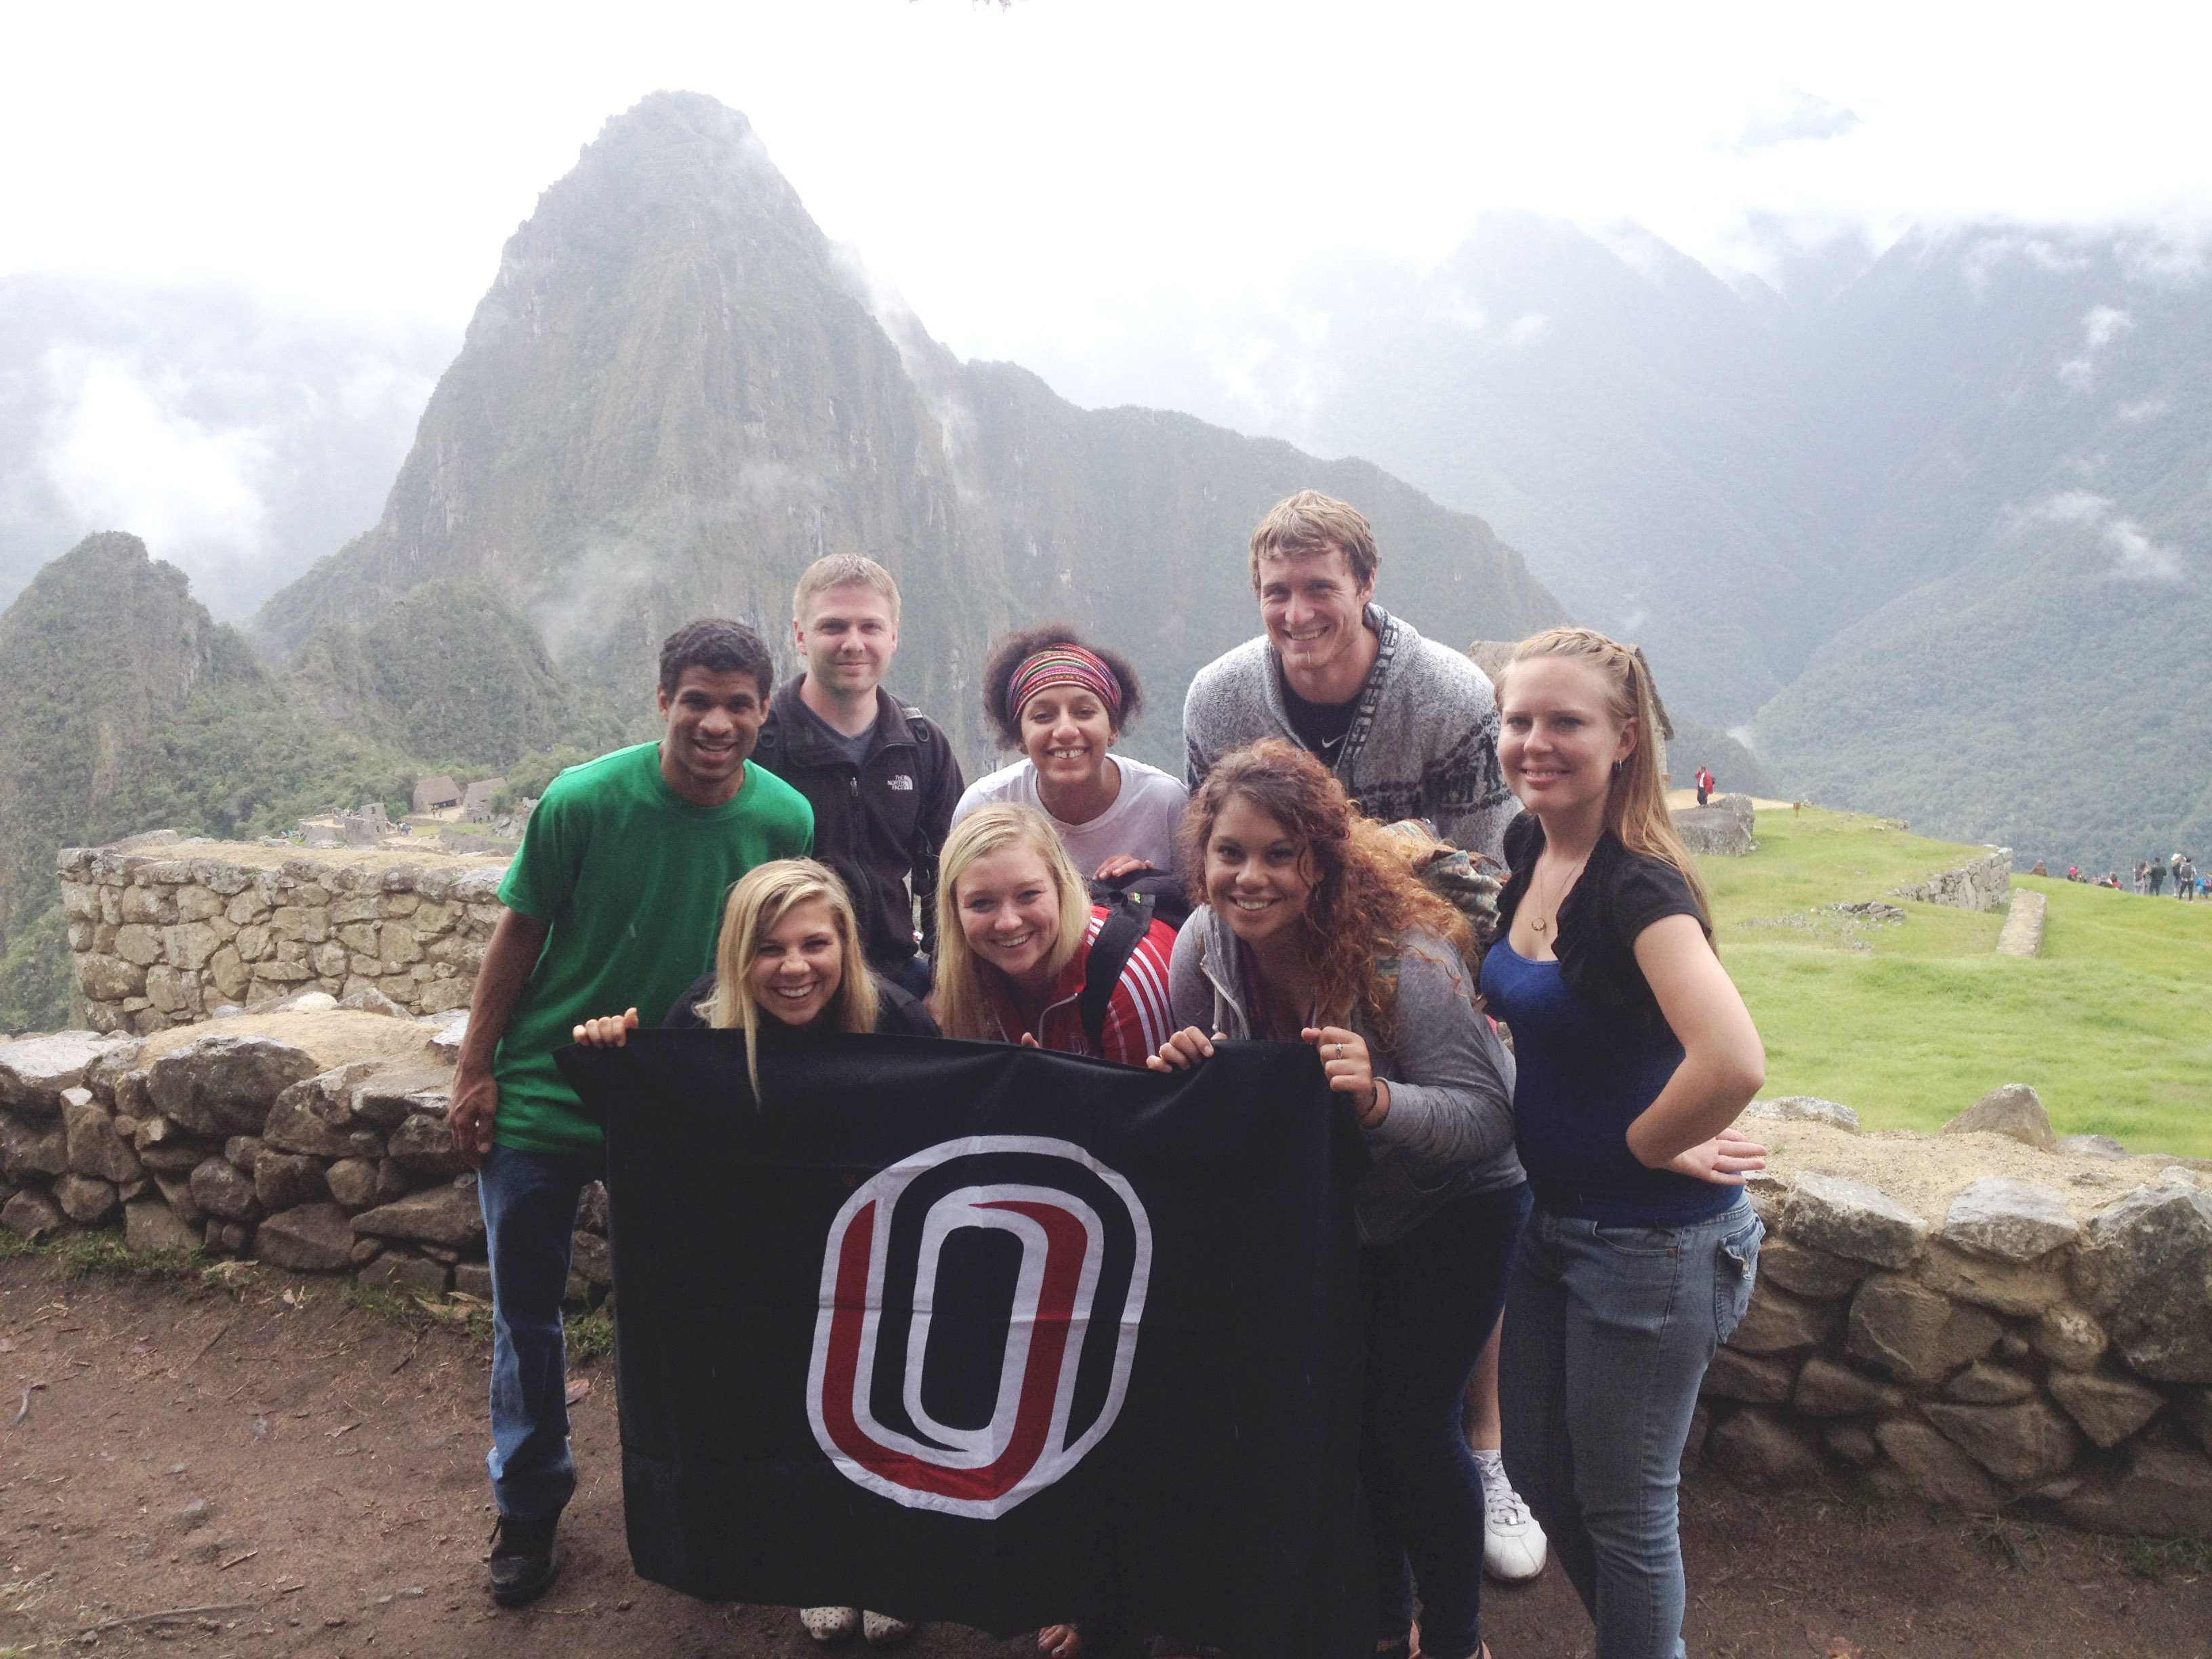 OLLAS Students at Machu Picchu in 2015